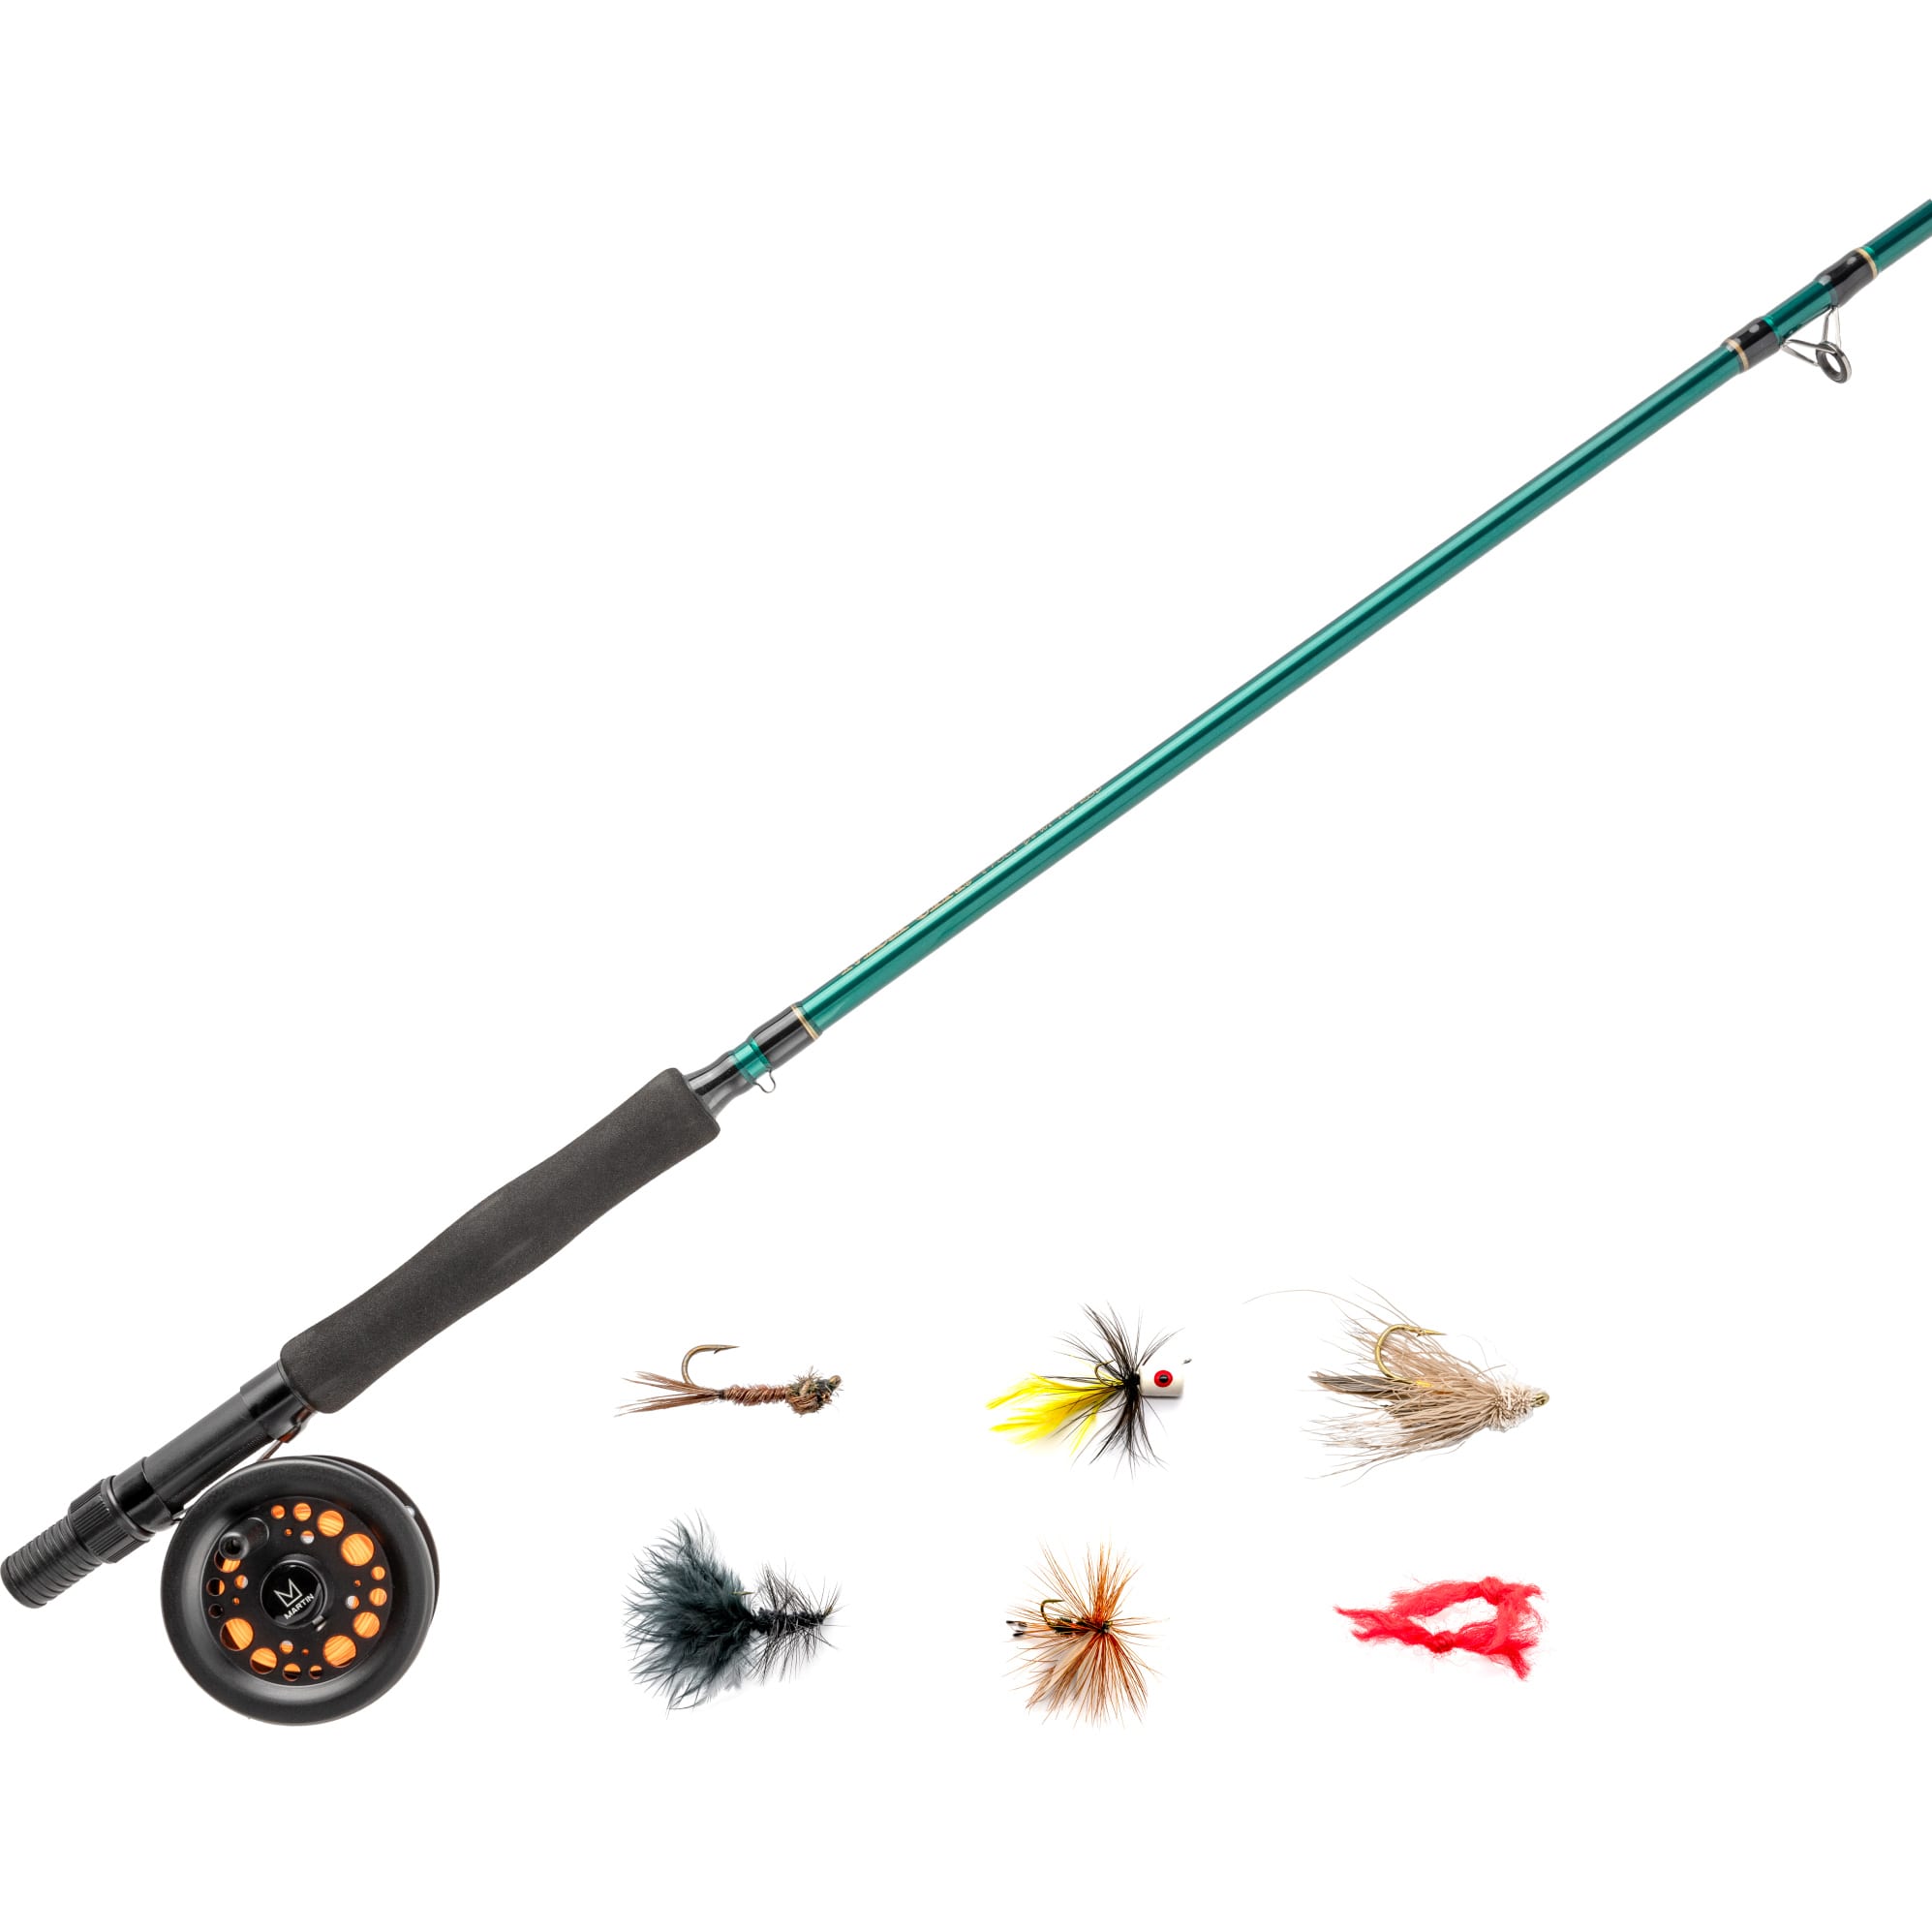 Martin Complete 8' Fly Kit - Cabelas - MARTIN - Rod & Reel Combos